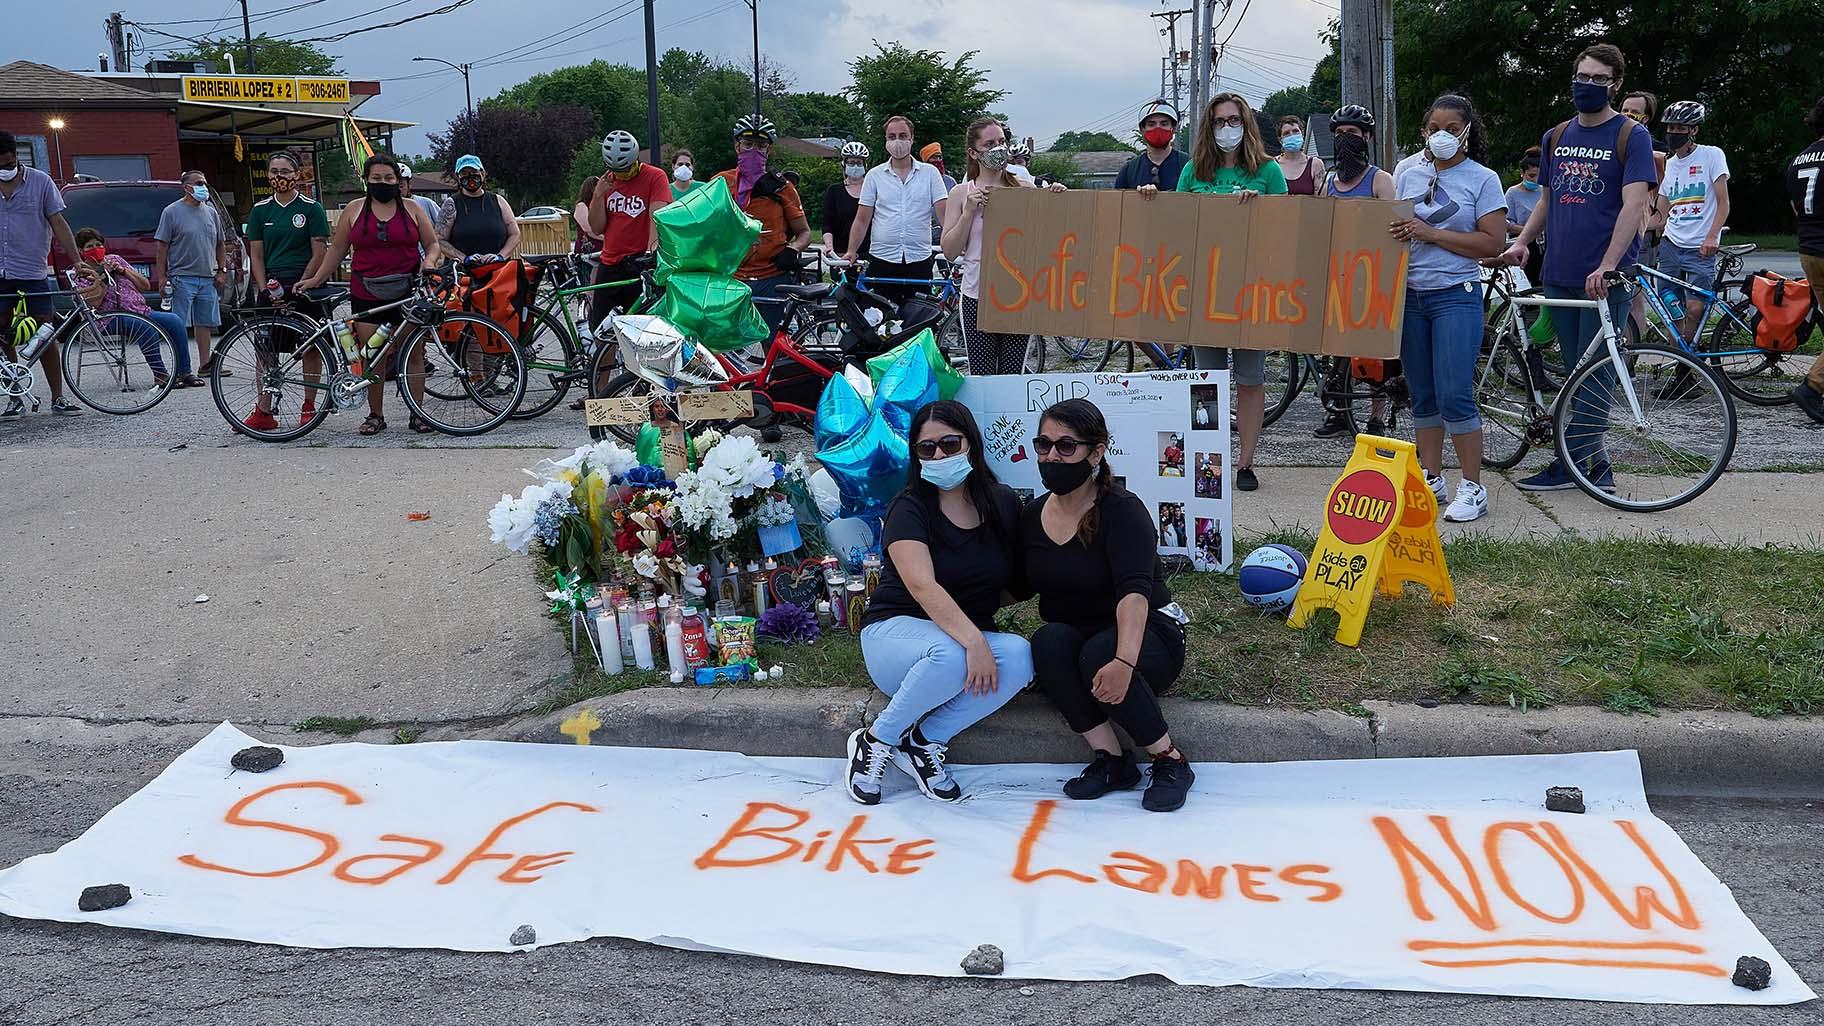 Demonstrators call for bike lanes following the death of Issac Martinez, who was cycling along Lawndale Avenue in June when he was fatally struck by a driver. (@bikelaneuprise / Twitter)